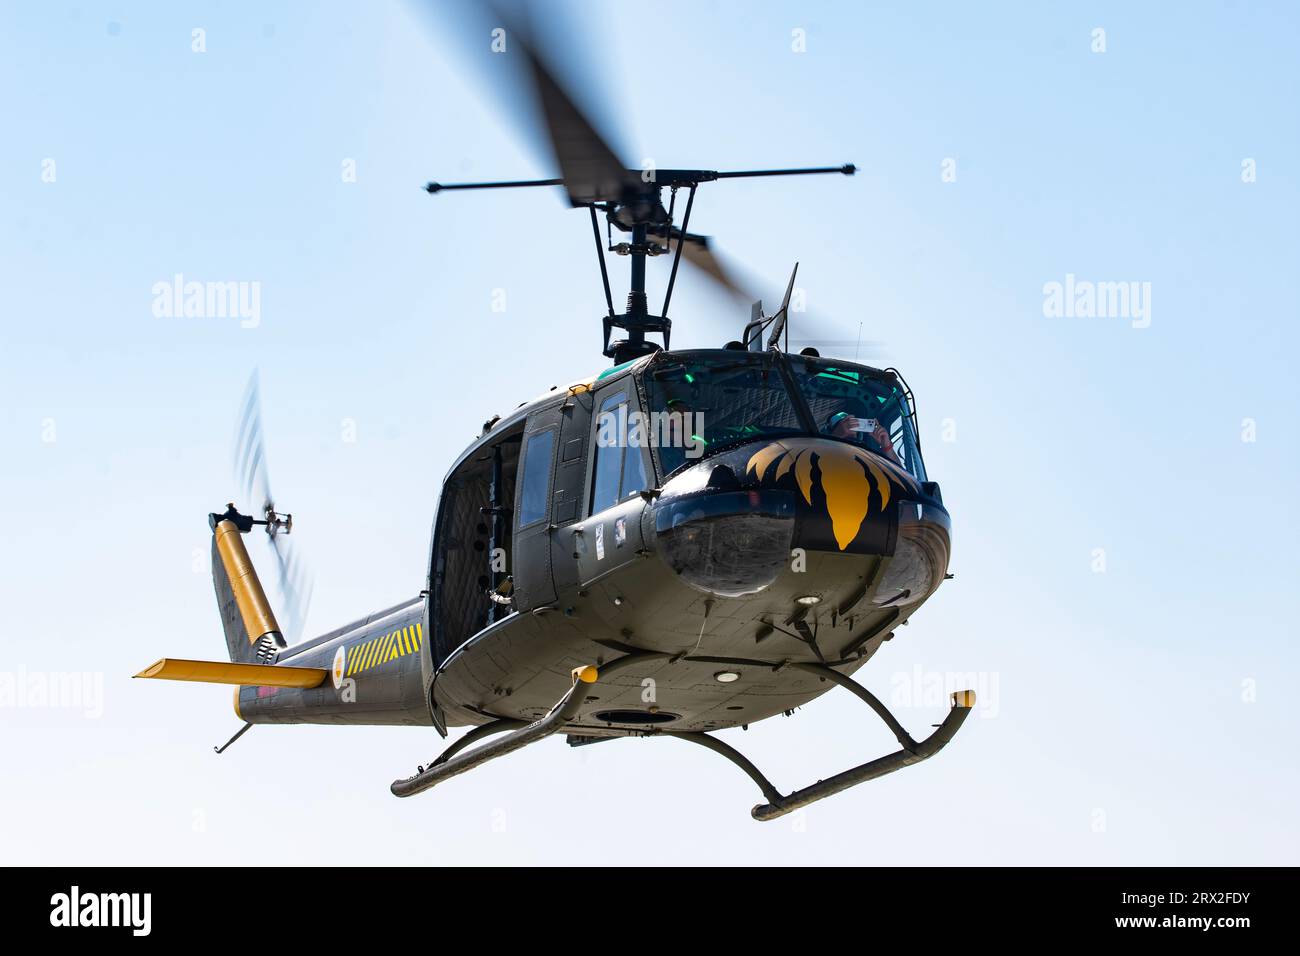 Bell UH-1 Iroquois, nickname Huey military helicopter  at SHG AIRSHOW 2023 Stock Photo